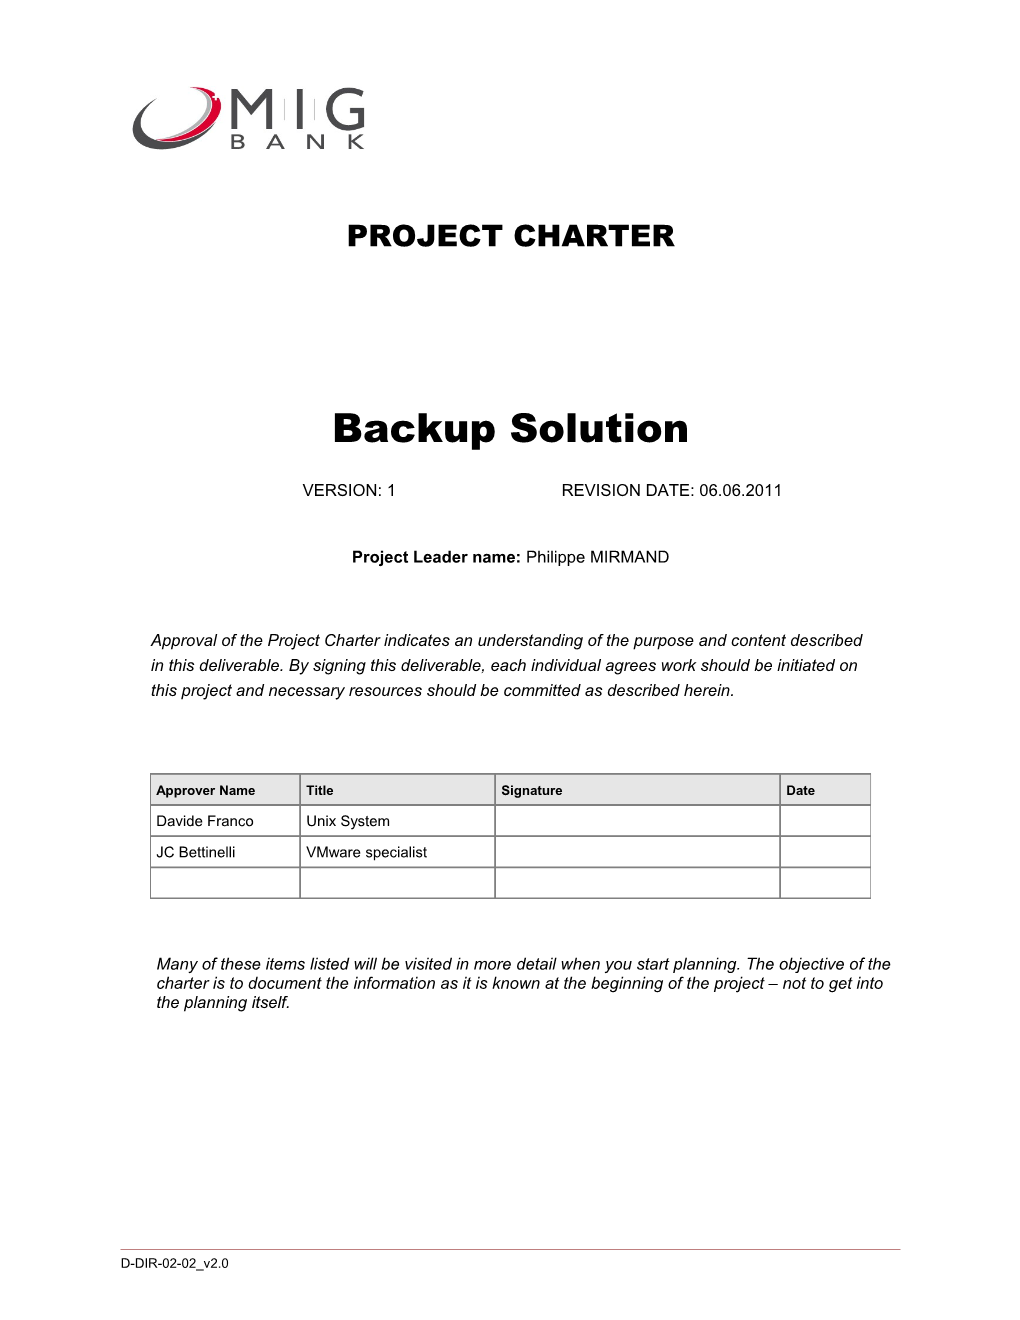 Project Charter Template s1